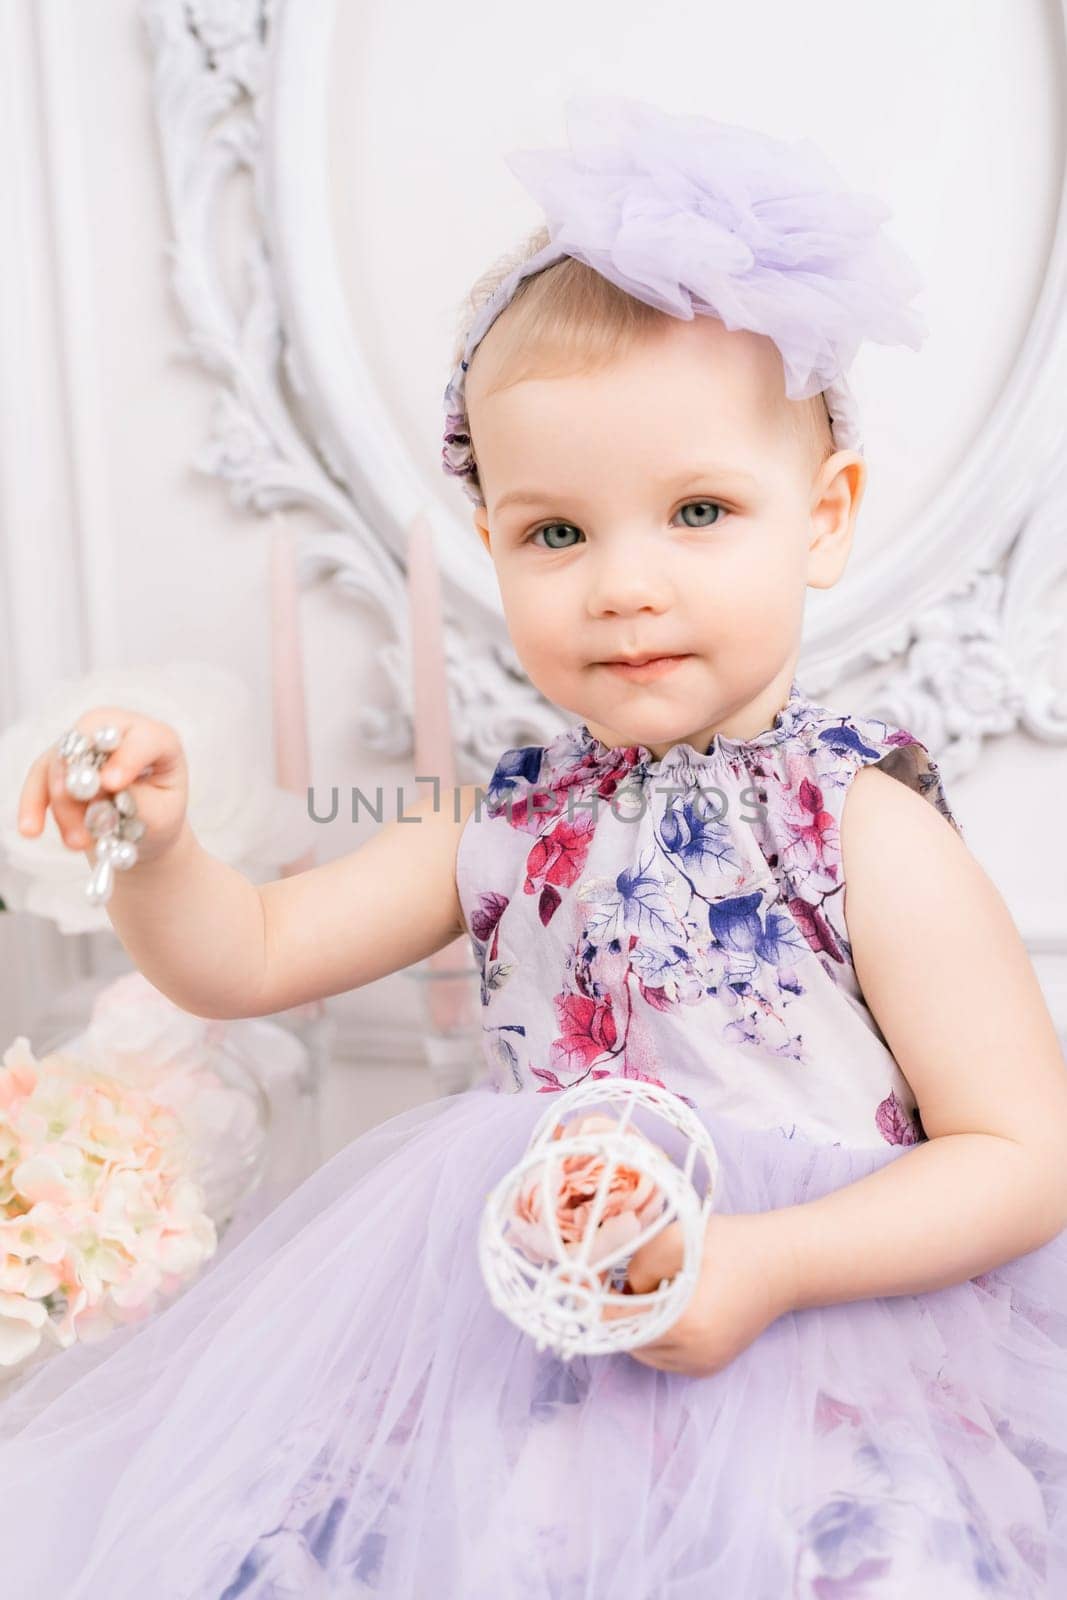 Baby girl elegant dress. A one-year-old girl in a puffy dress and a cute bow poses against the backdrop of a bright room with a dressing table and flowers